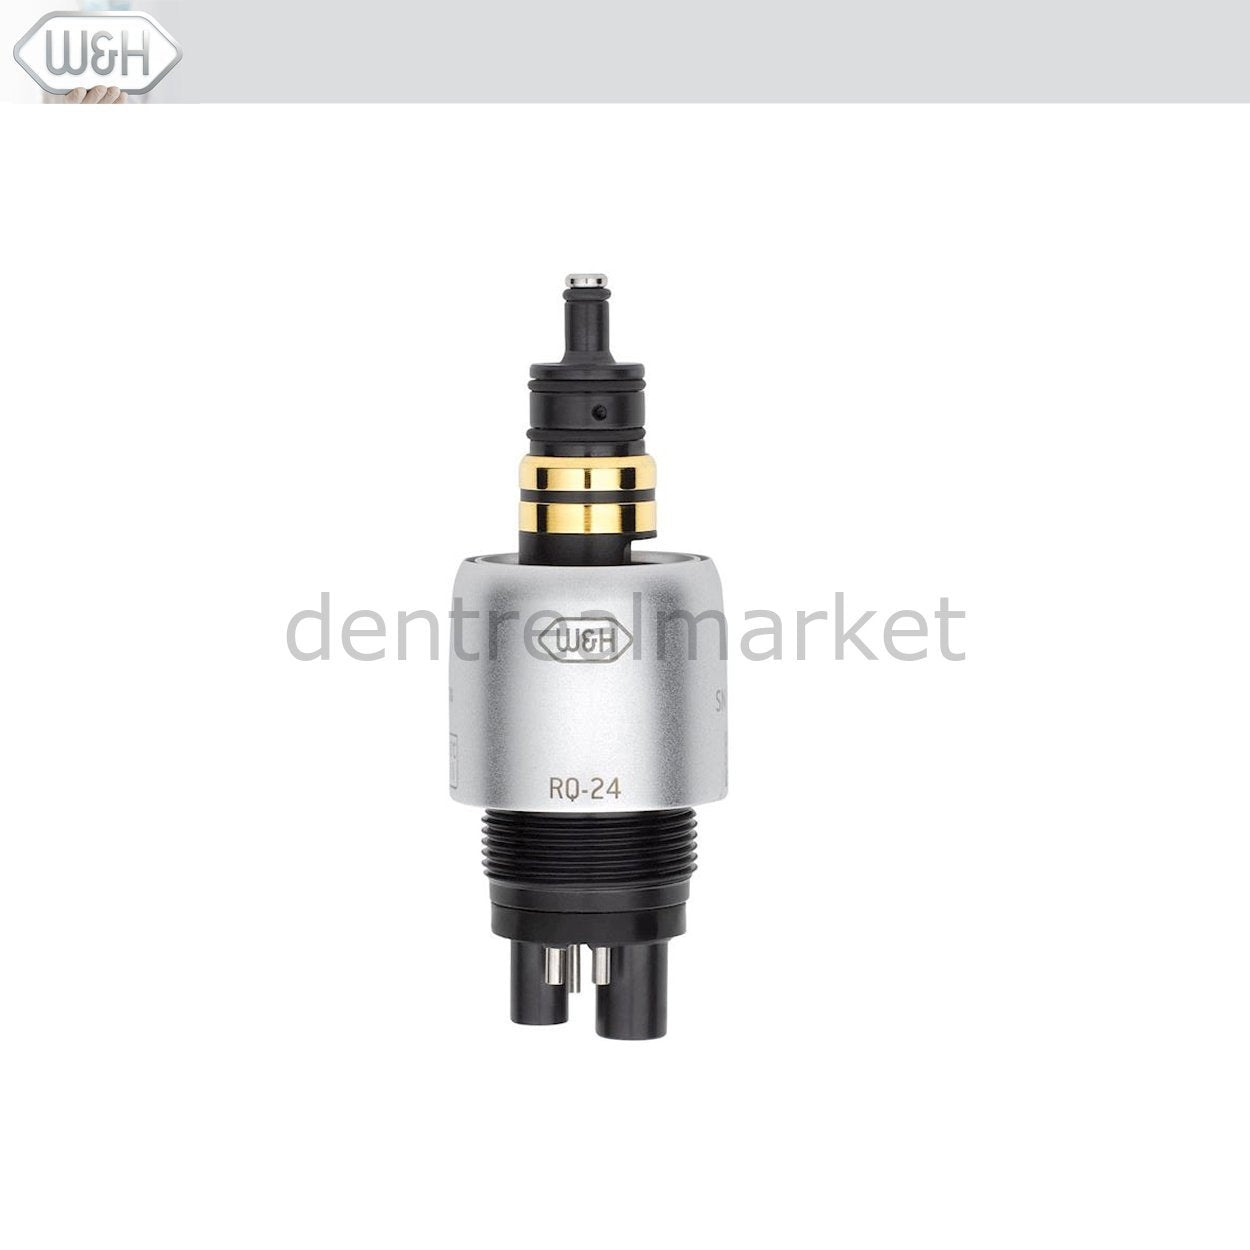 DentrealStore - W&H Dental RQ-24 Coupling with Light and 6 Hole Connection